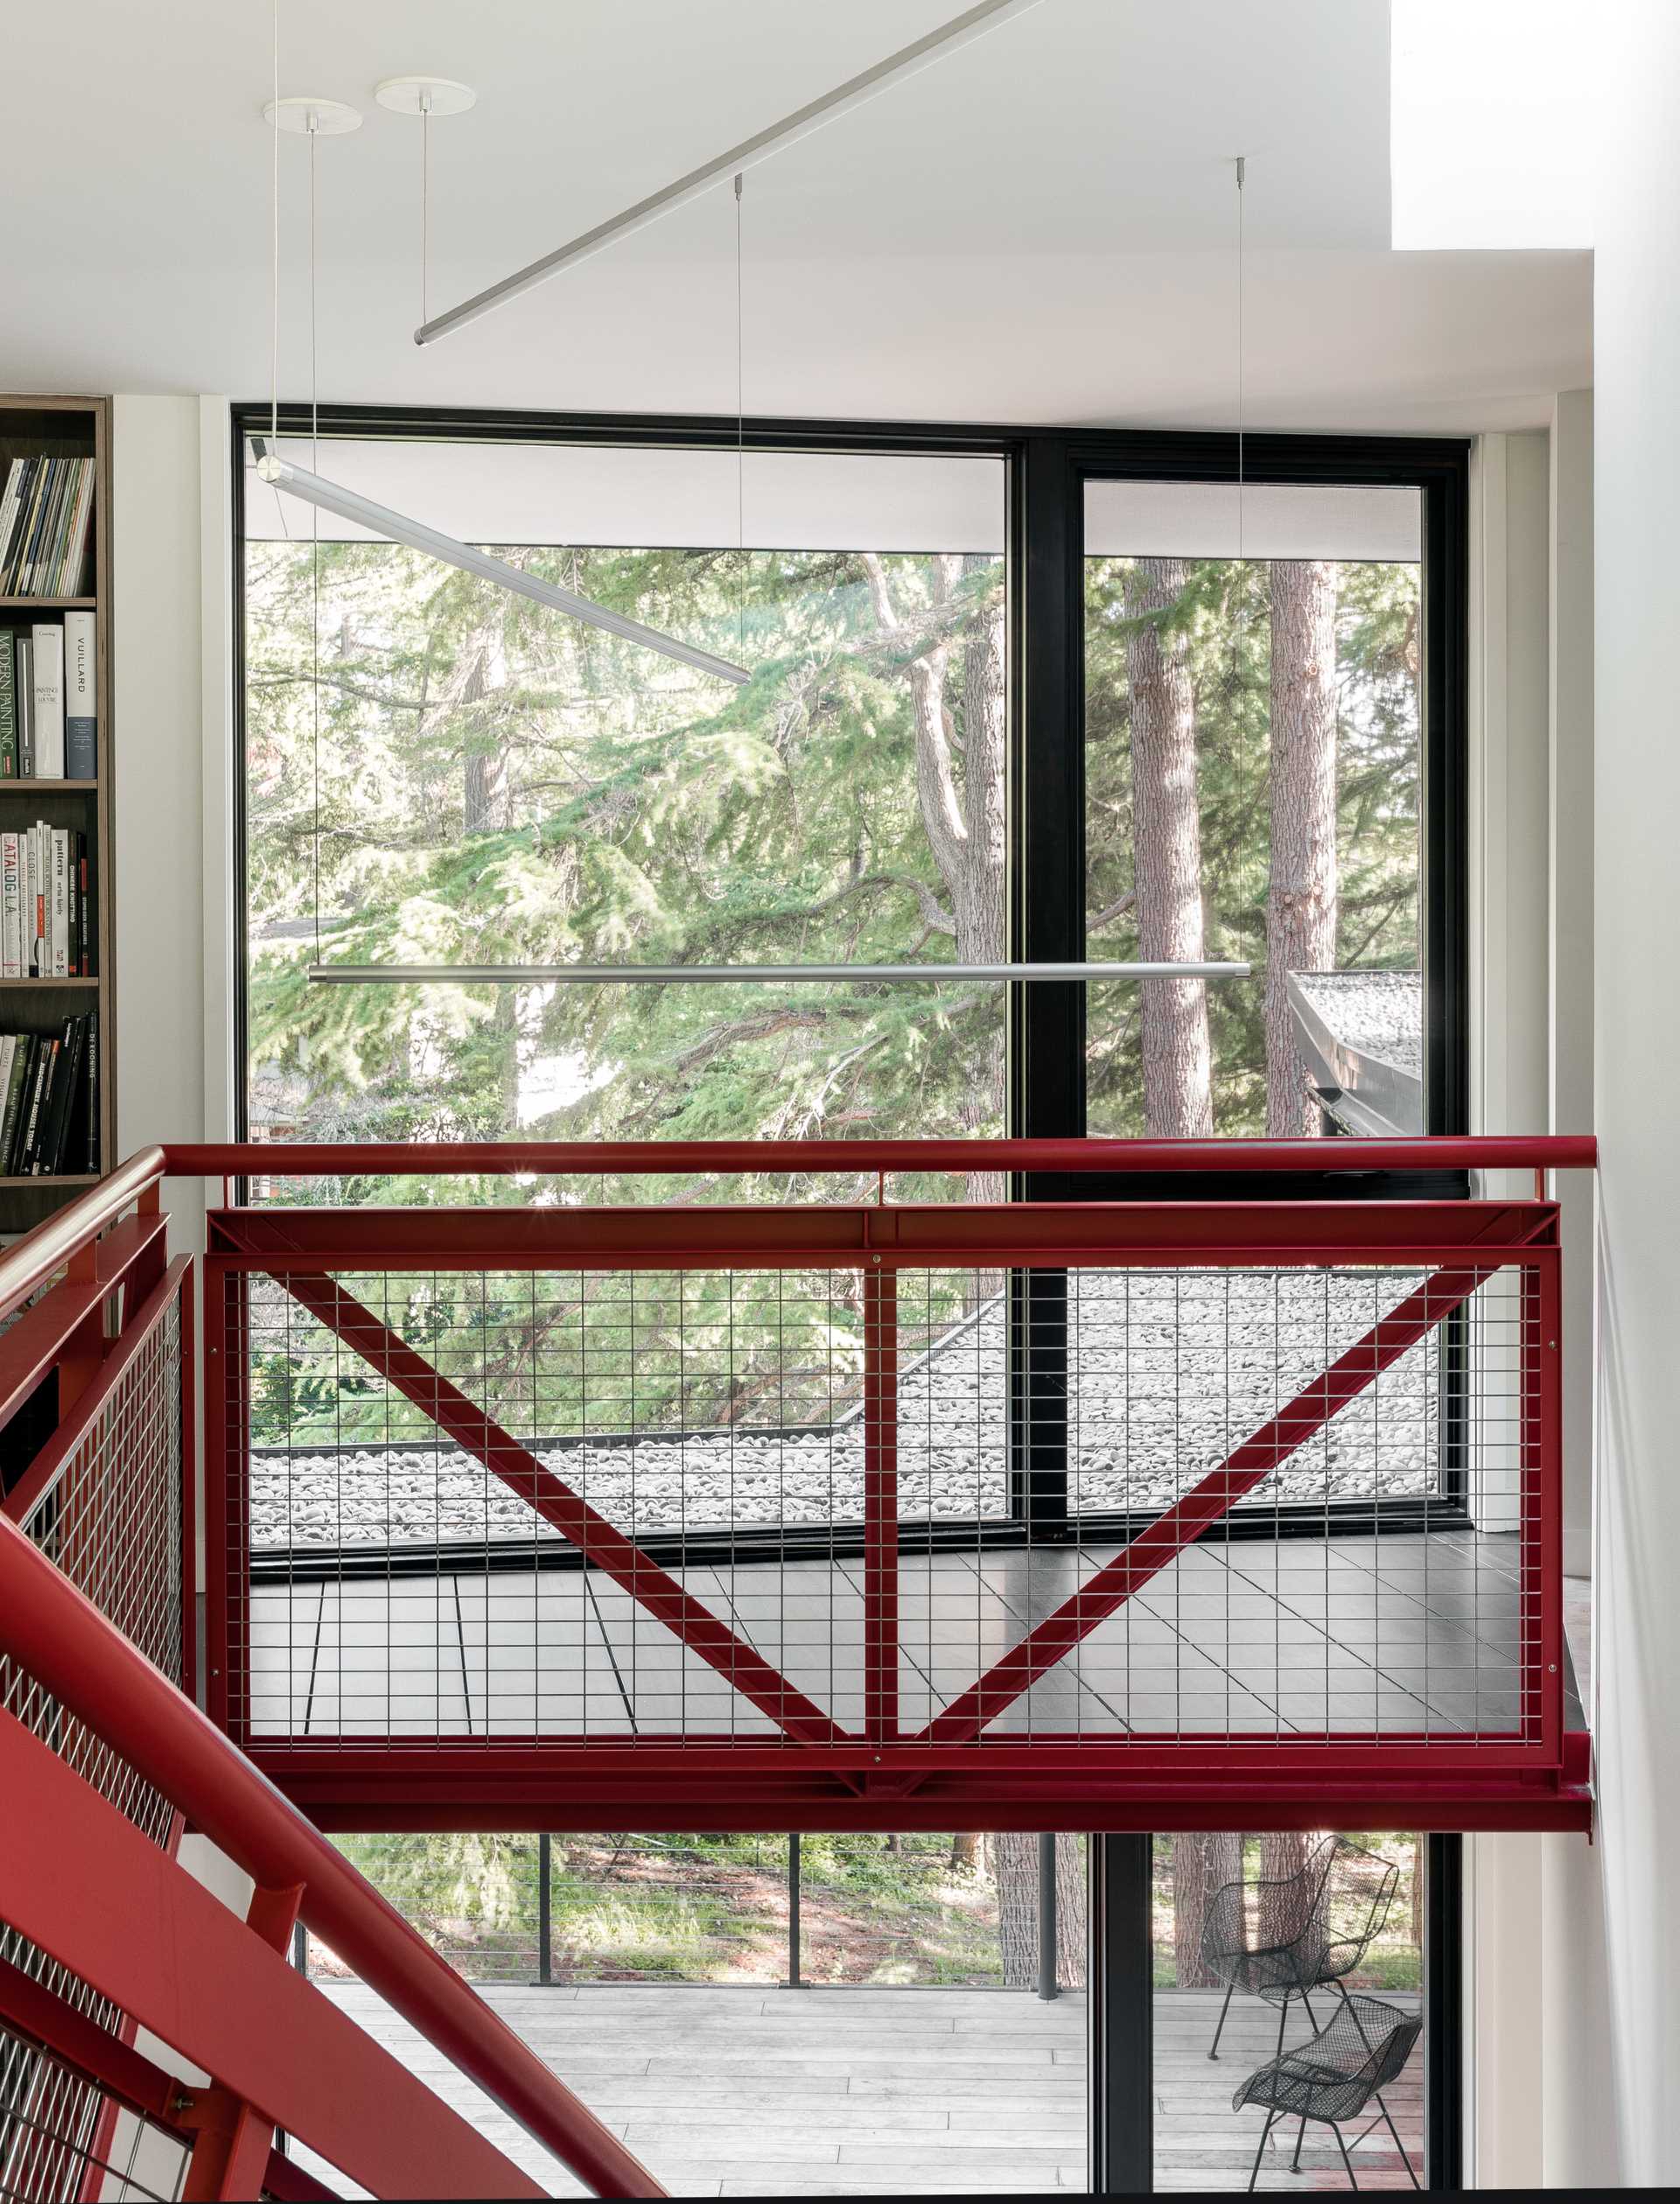 A red metal staircase designed by DeForest, connects the main living level of the home with the upper level.